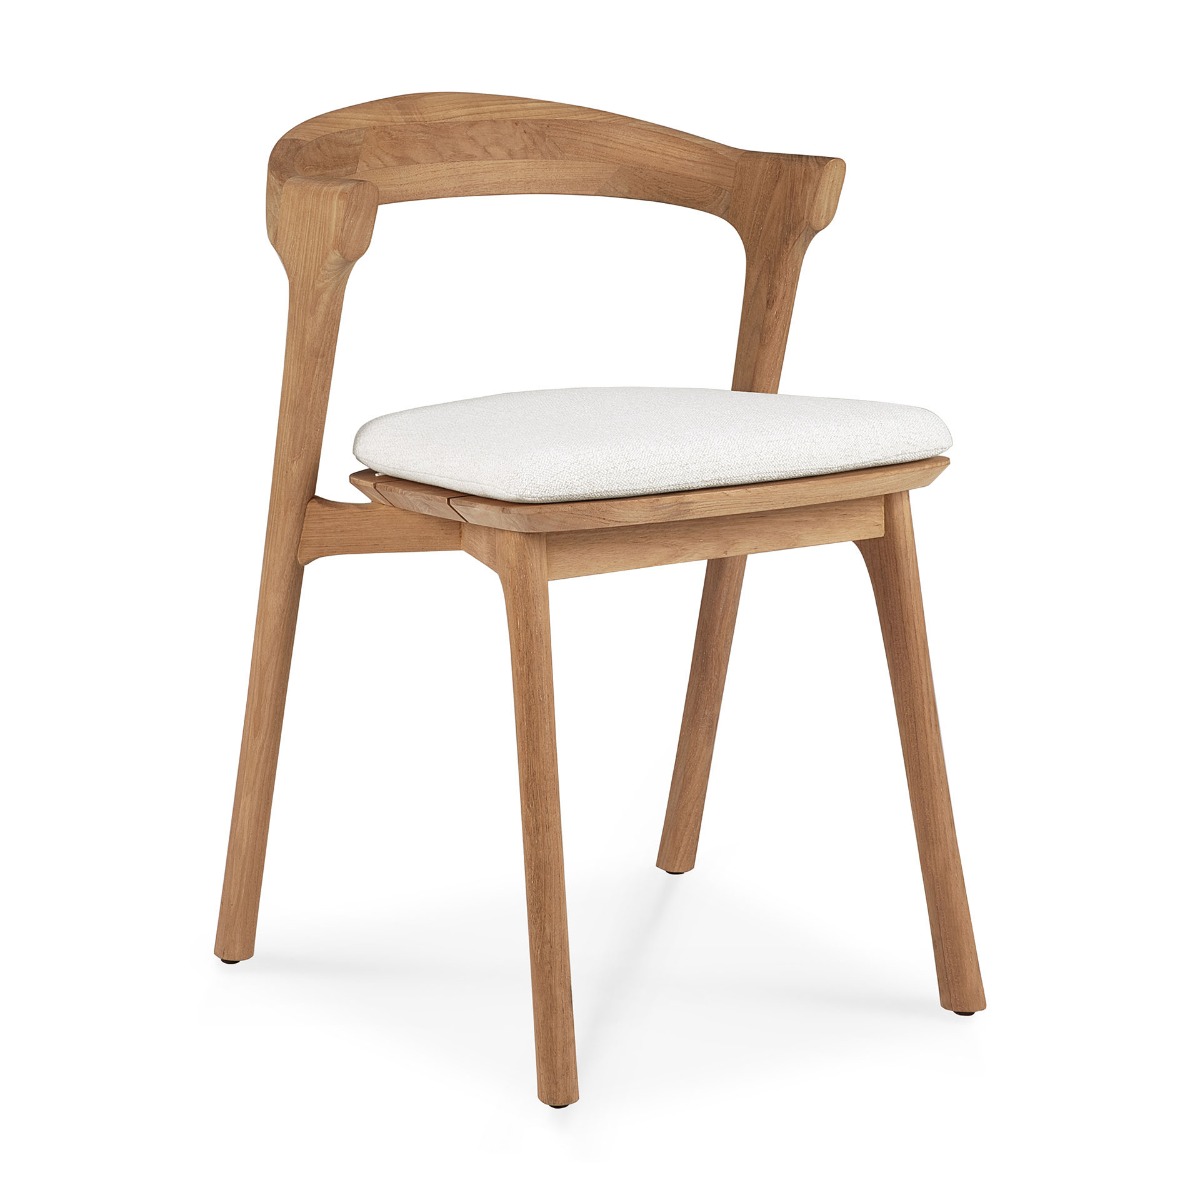 Teak Bok outdoor dining chair with cushion off white